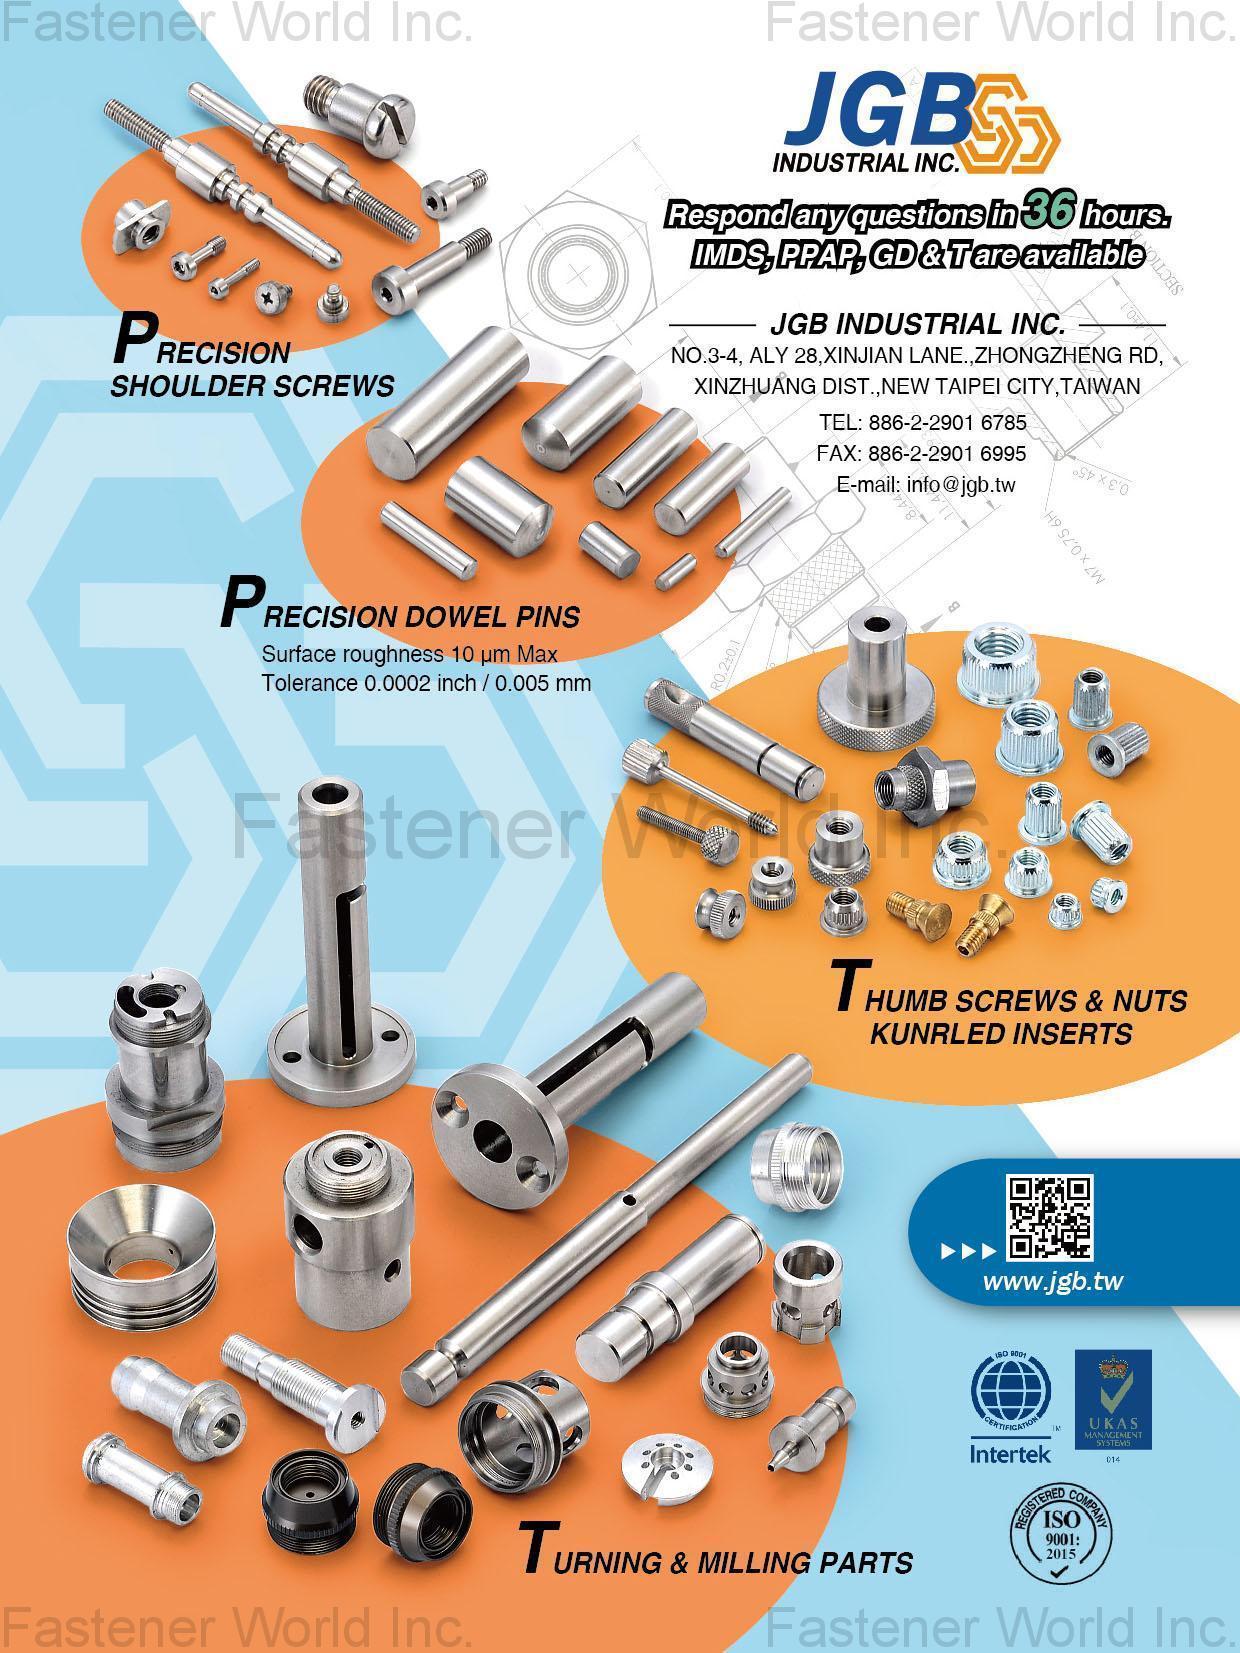 Shoulder Screws,Precision Metal Parts,Dowel Pins,Thumb Nuts,Turning Parts,Milled Nuts,Thumb Screws,Brass Insert,Milled Bolts,Special Cold / Hot Forming Parts